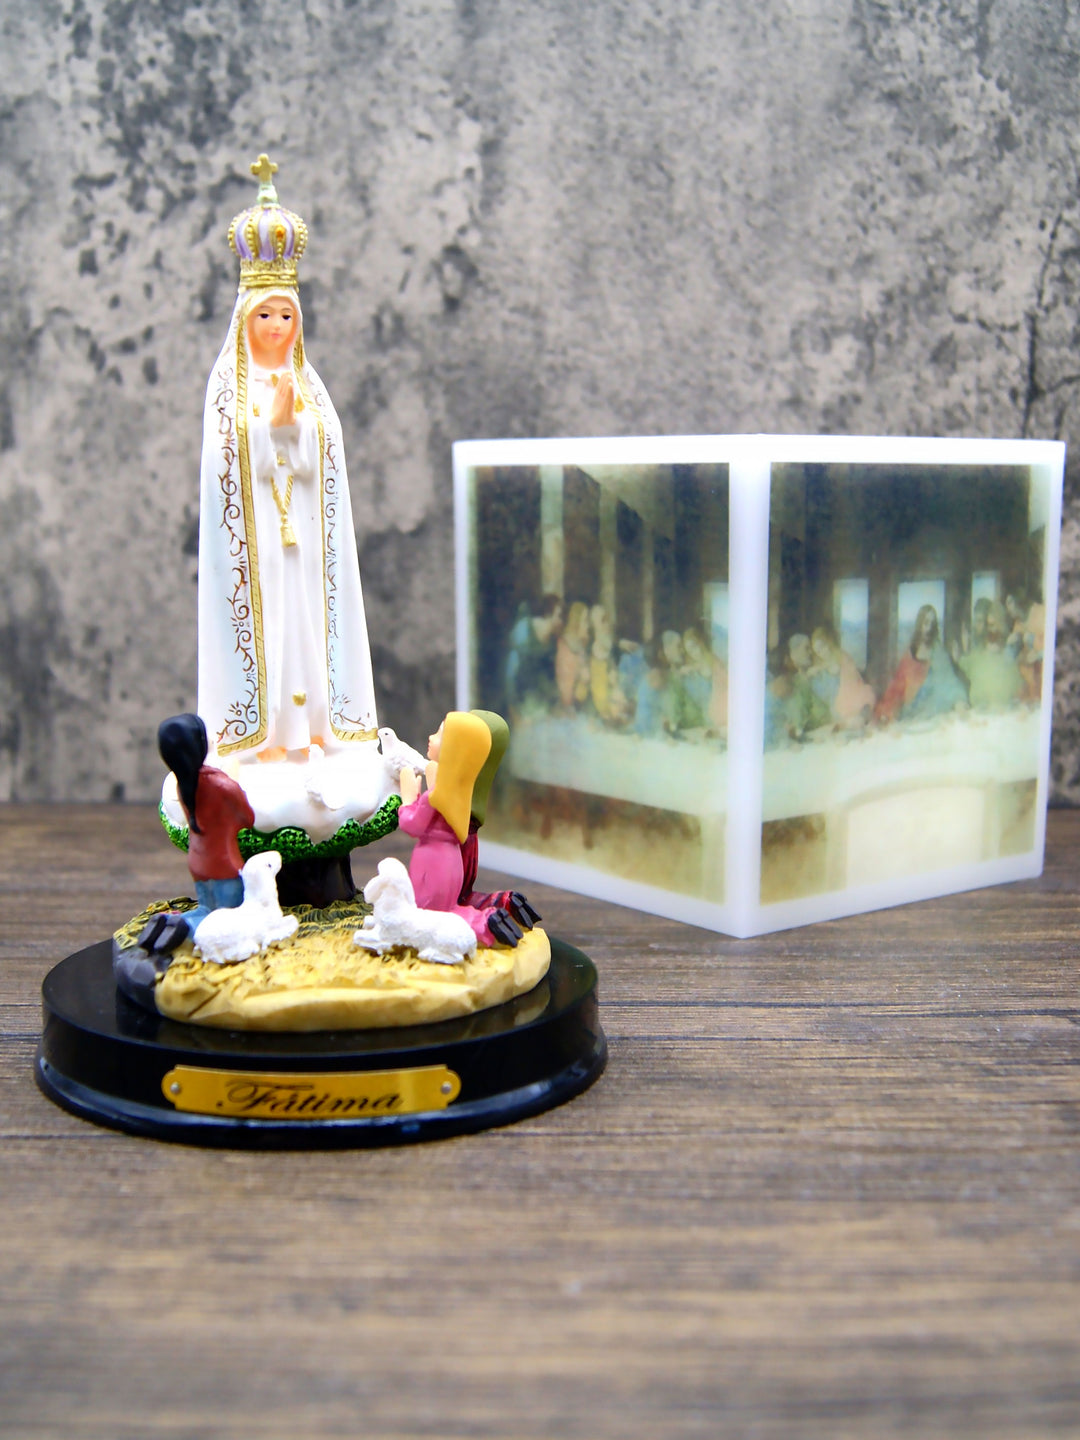 6.5 Inch Our Lady of Fatima with Children Statue of the Apparition